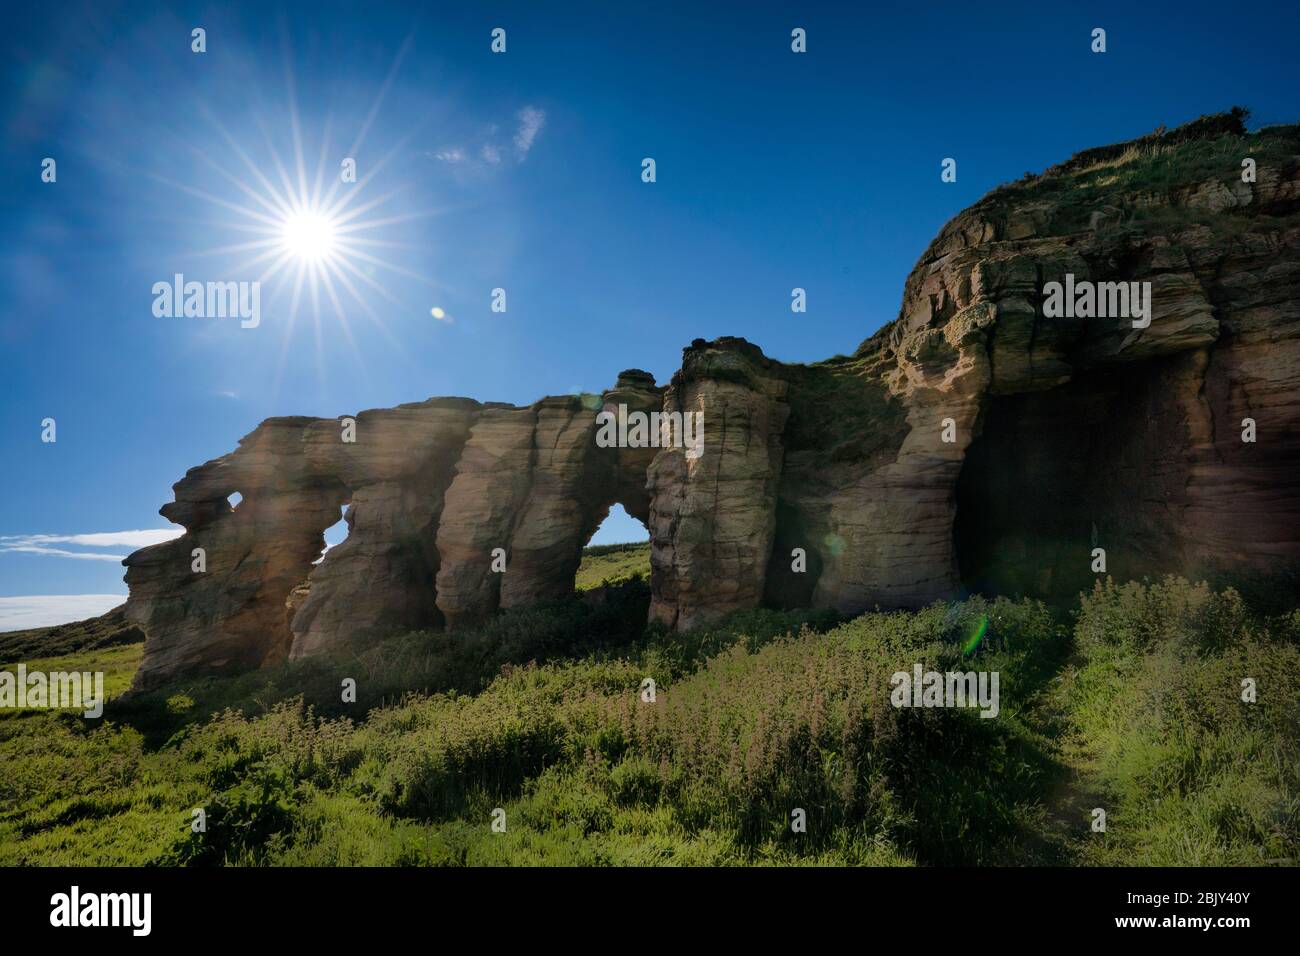 Sunstar above the Caiplie Caves, or Coves, rock formation along the North Sea on the Fife Coastal Path, Crail, Scotland, Europe Stock Photo